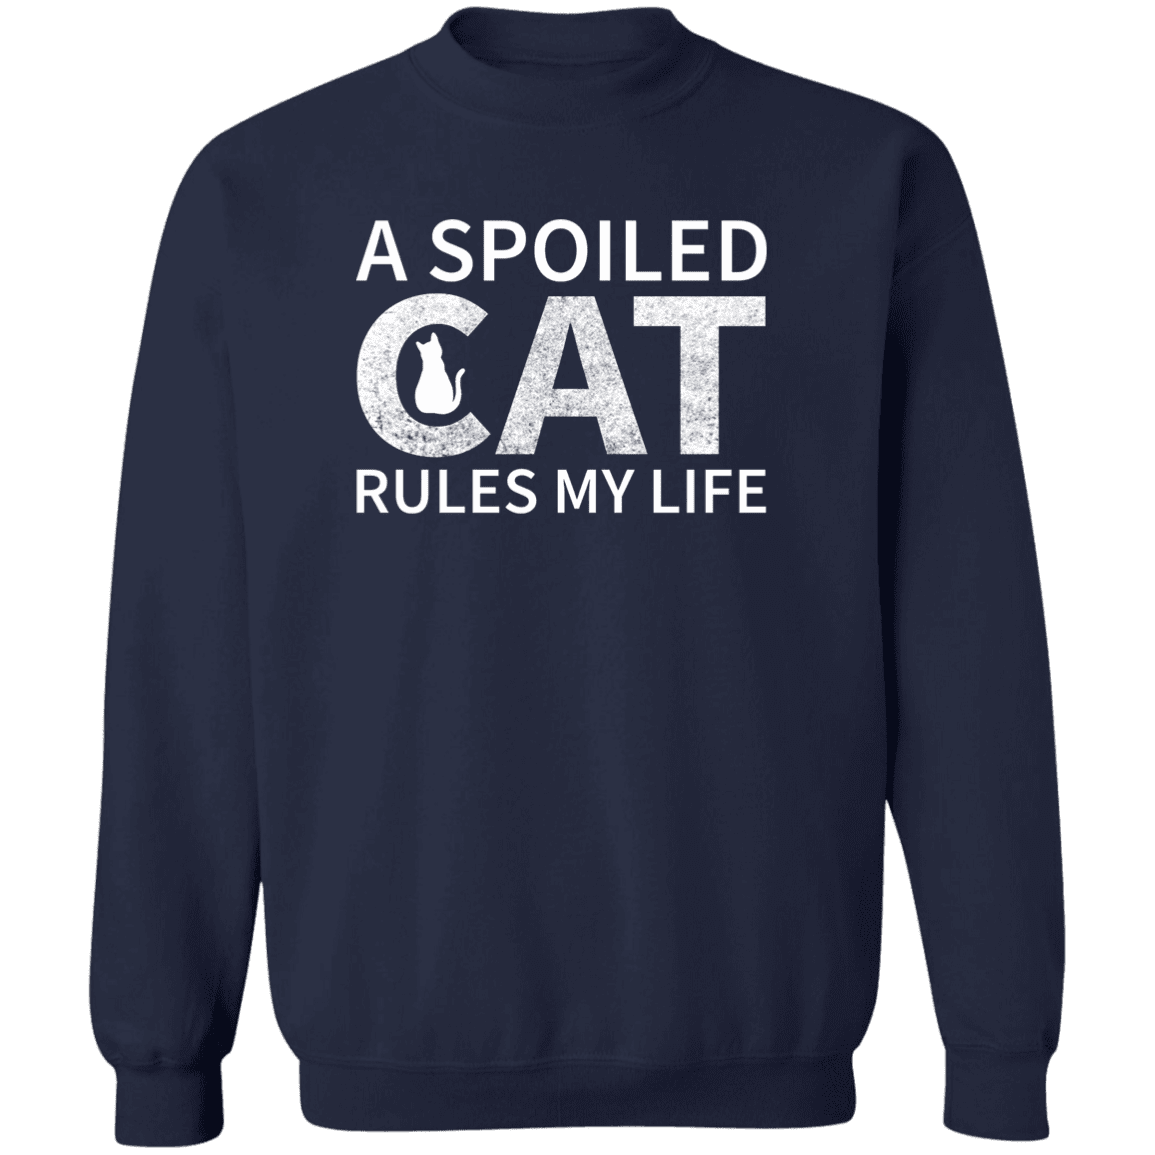 A Spoiled Cat Rules My Life - Sweatshirt.